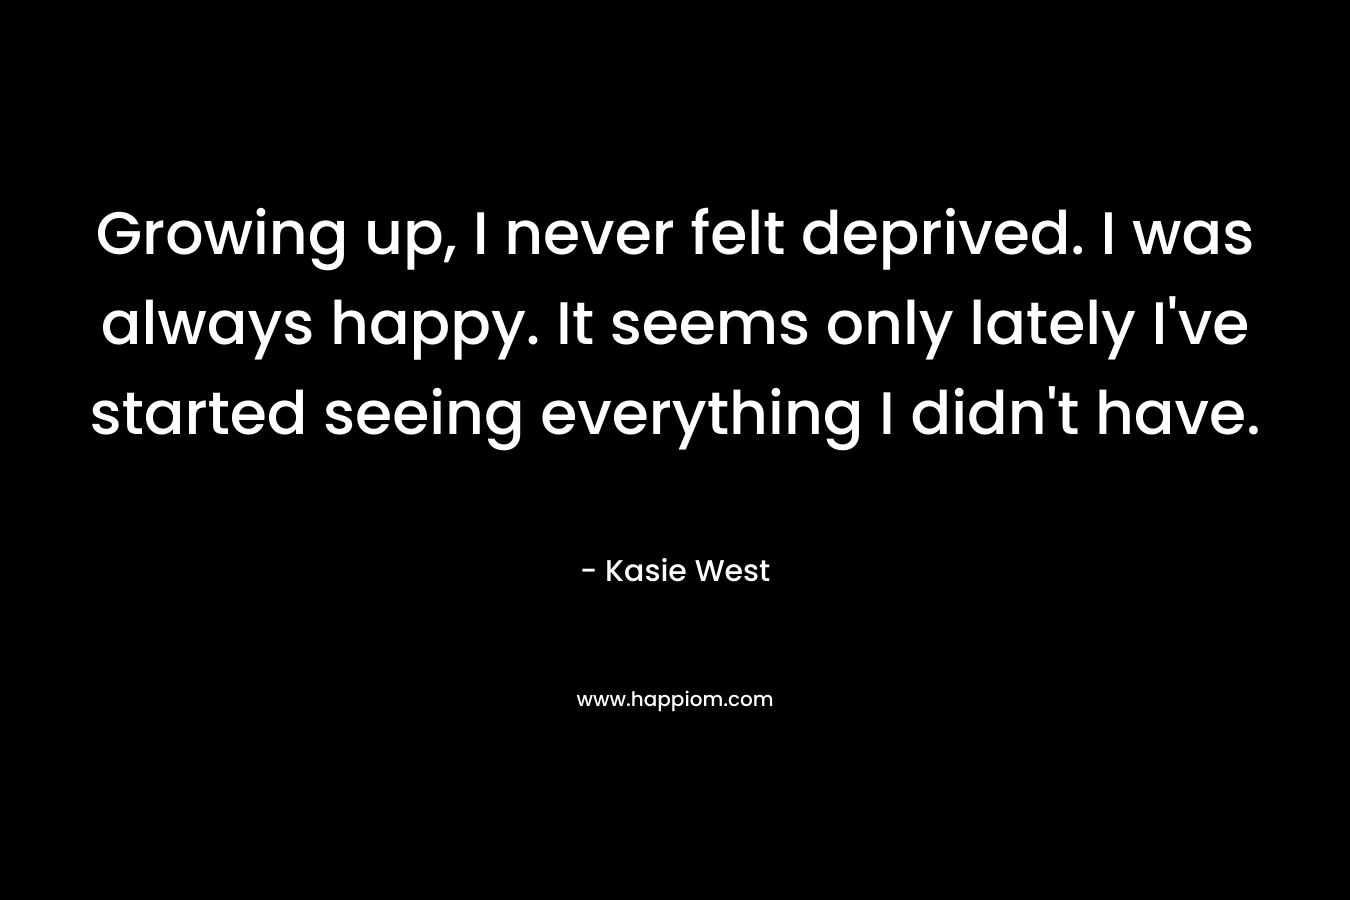 Growing up, I never felt deprived. I was always happy. It seems only lately I’ve started seeing everything I didn’t have. – Kasie West